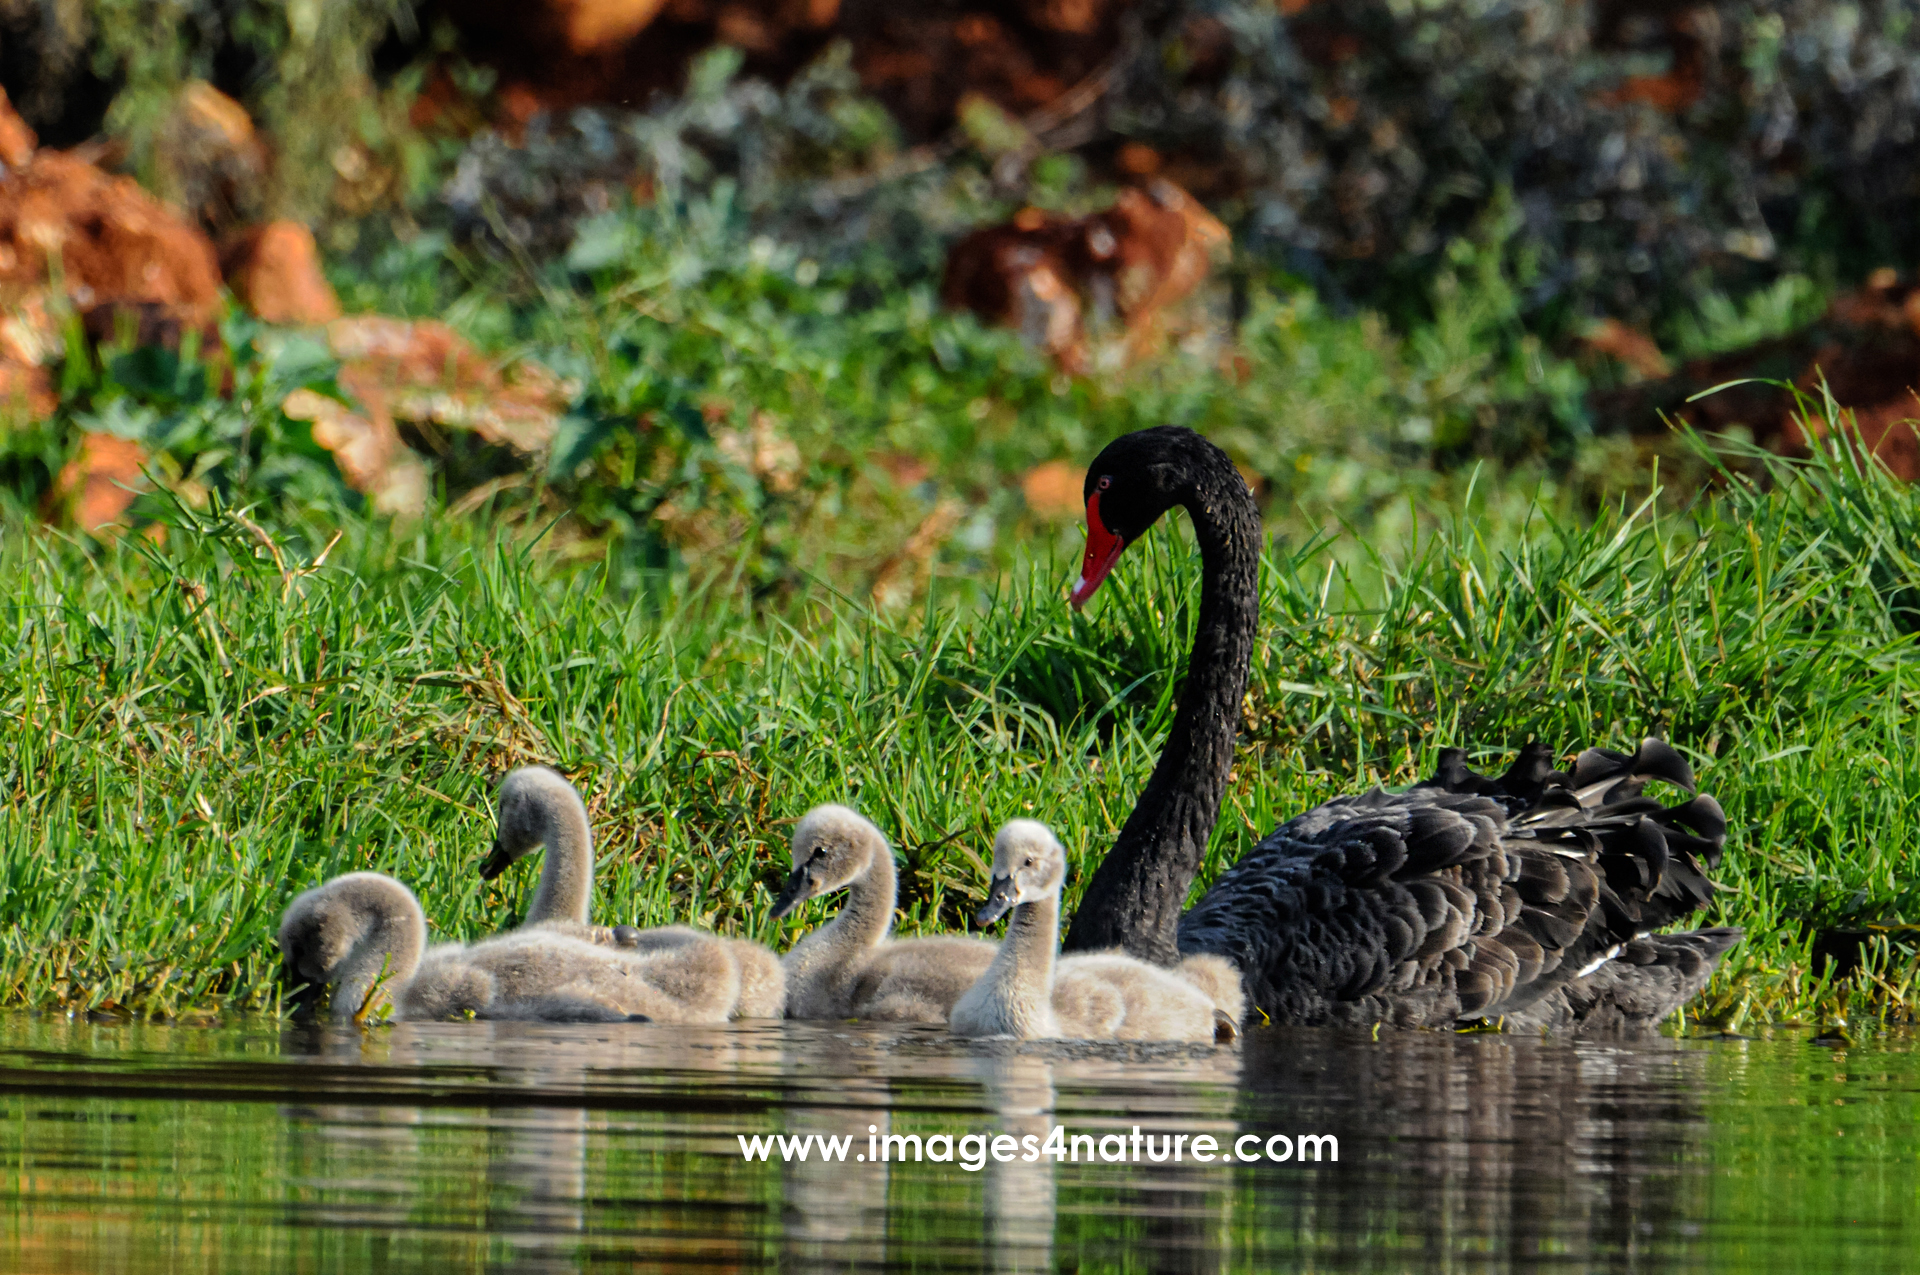 Black swan with four grey cygnets swimming in pond